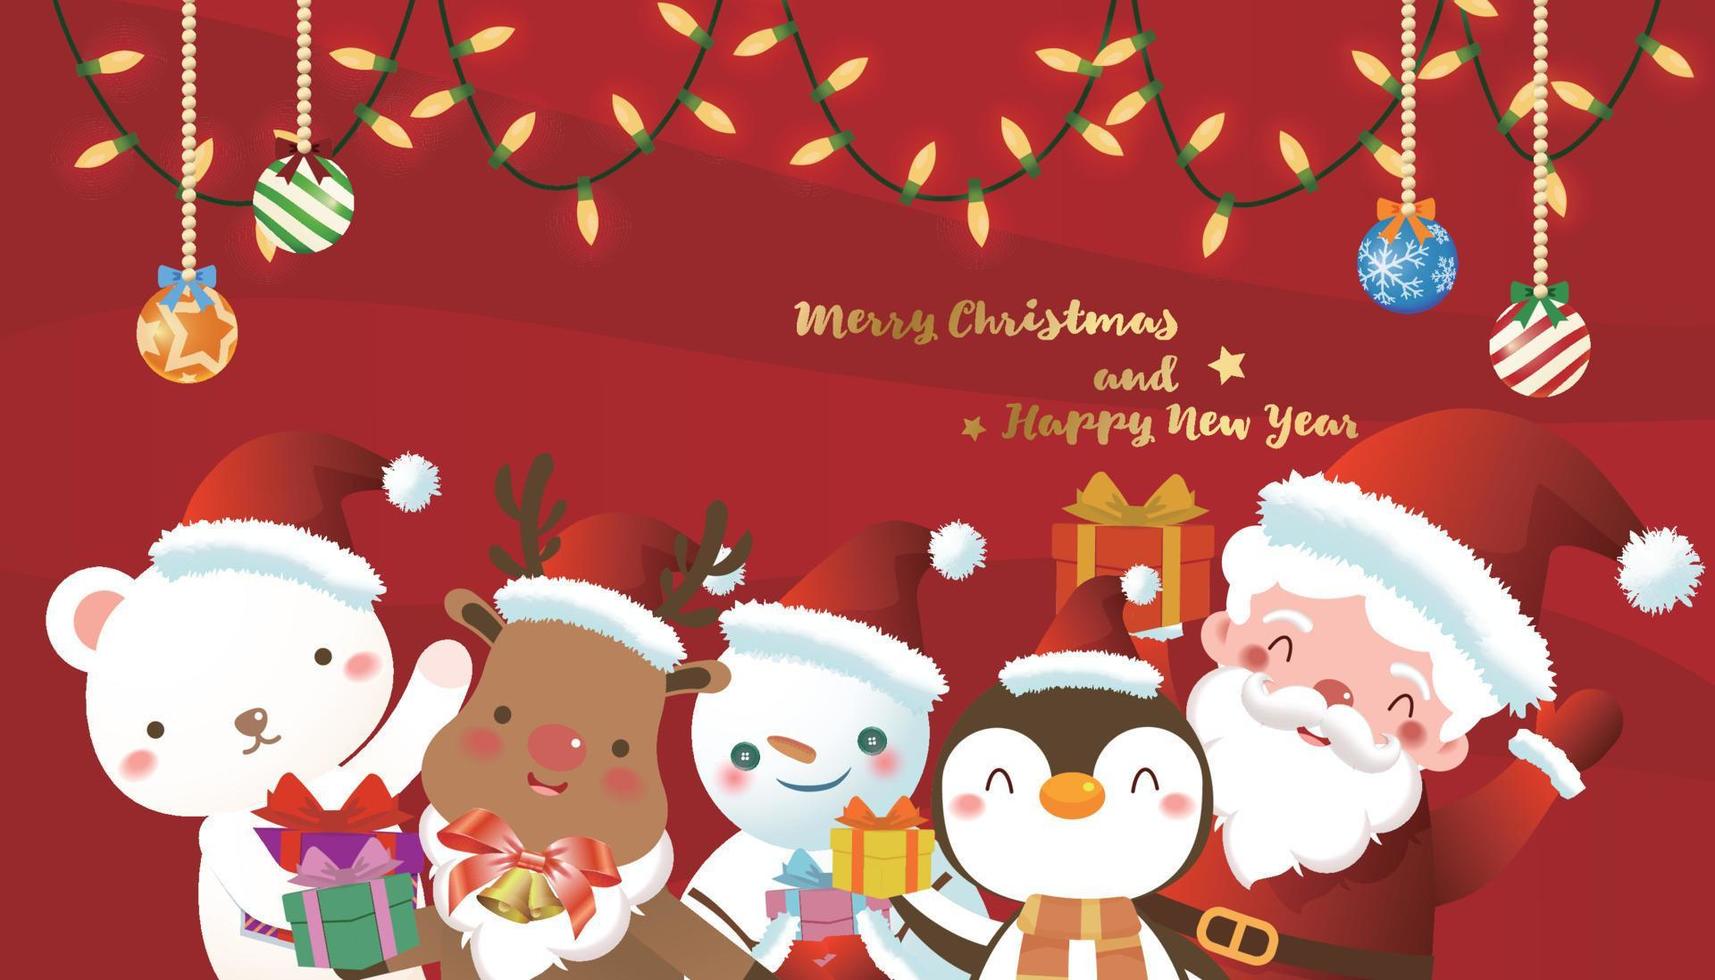 Santa Claus and little animals are celebrating Christmas with gifts, string lights and decorations on red background vector